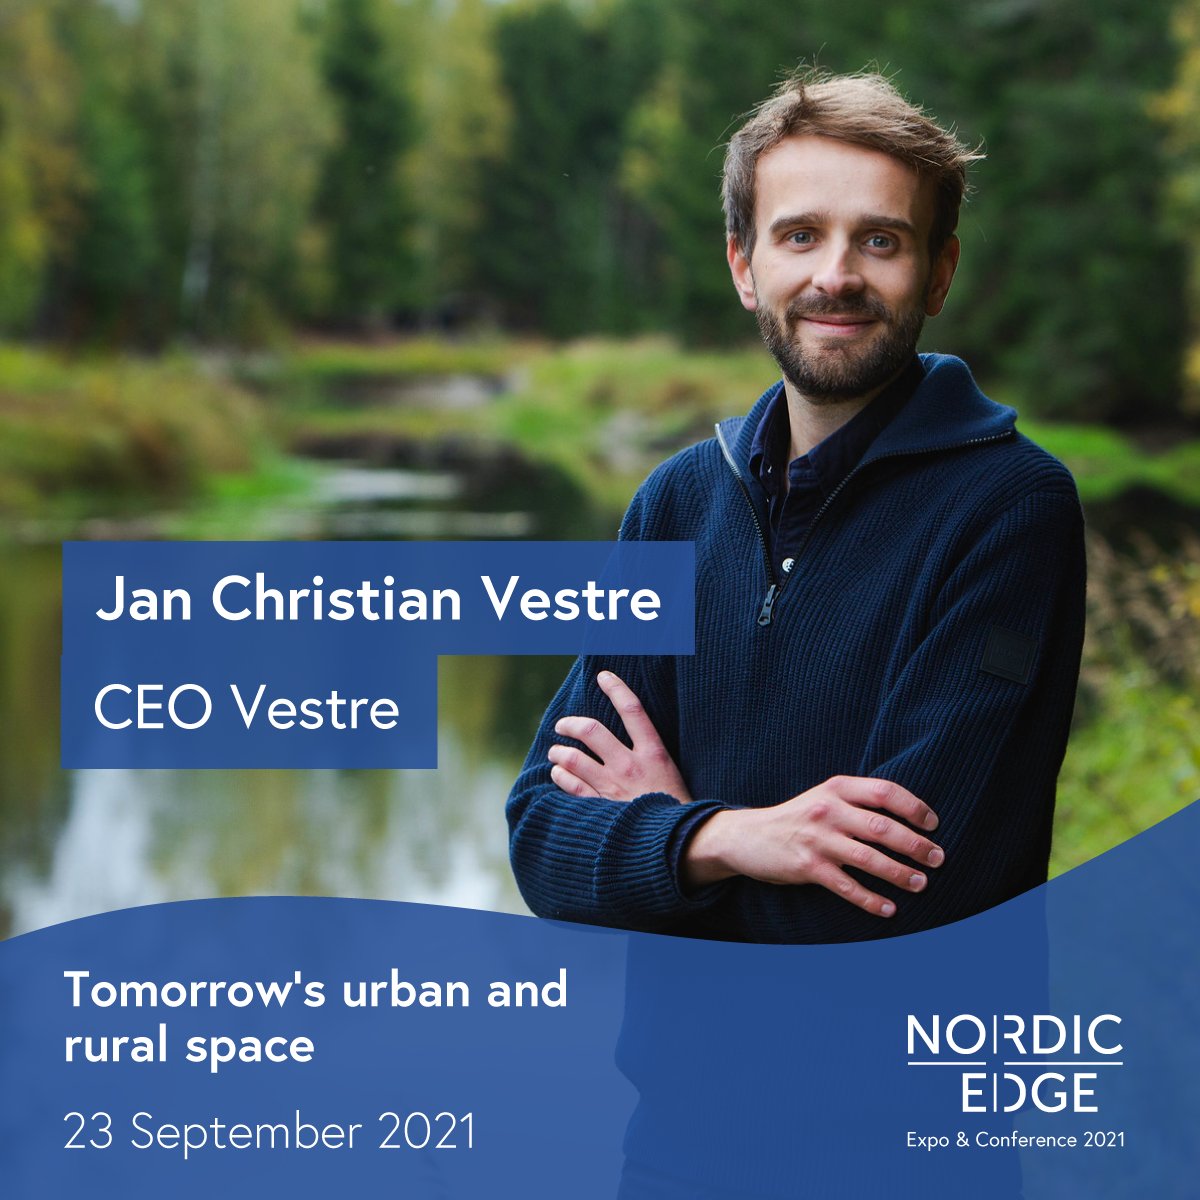 ⭐Welcome to the last day of #NordicEdgeExpo 2021. Tomorrow, we will dive into the theme: Spaces & Places, with voices from the Nordics and Europe. Some Highlights: keynotes with @jcvestre, @Ciliaindahl Tune in at 09:00 👉nee2021.com/nordicedgeexpo